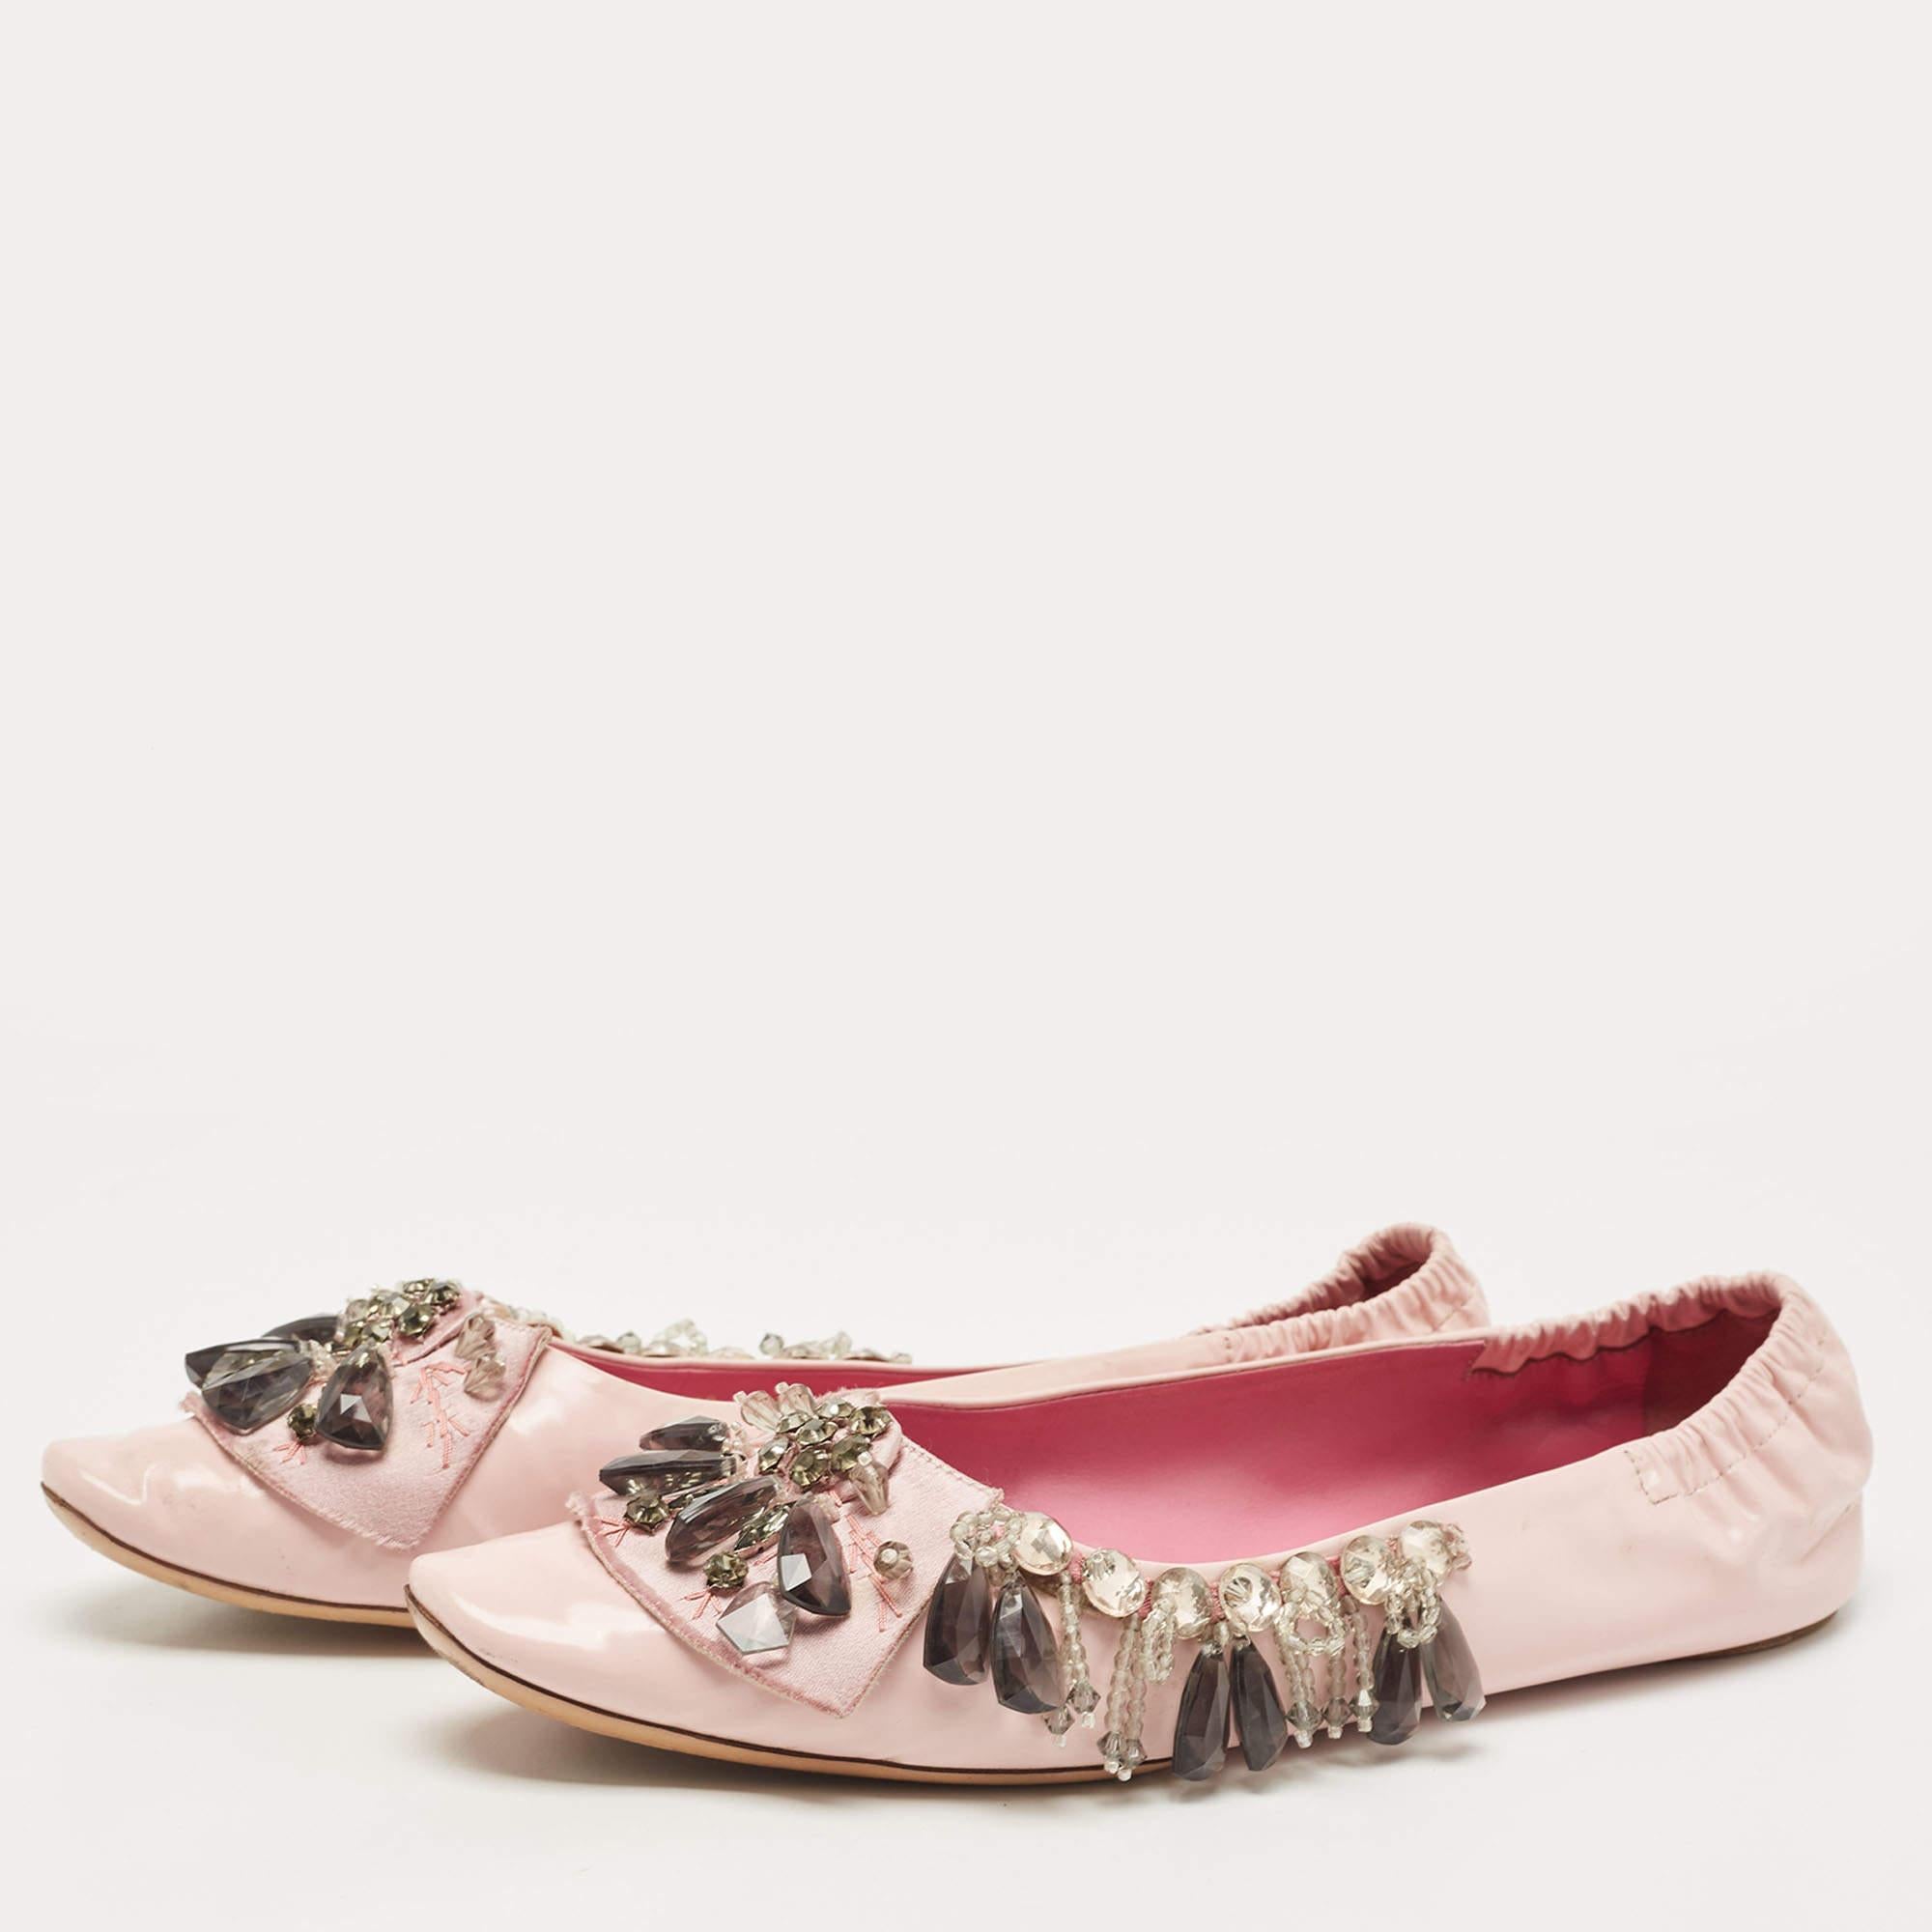 Louis Vuitton Pink Leather Embellished Ballet Flats Size 39.5 In Good Condition For Sale In Dubai, Al Qouz 2